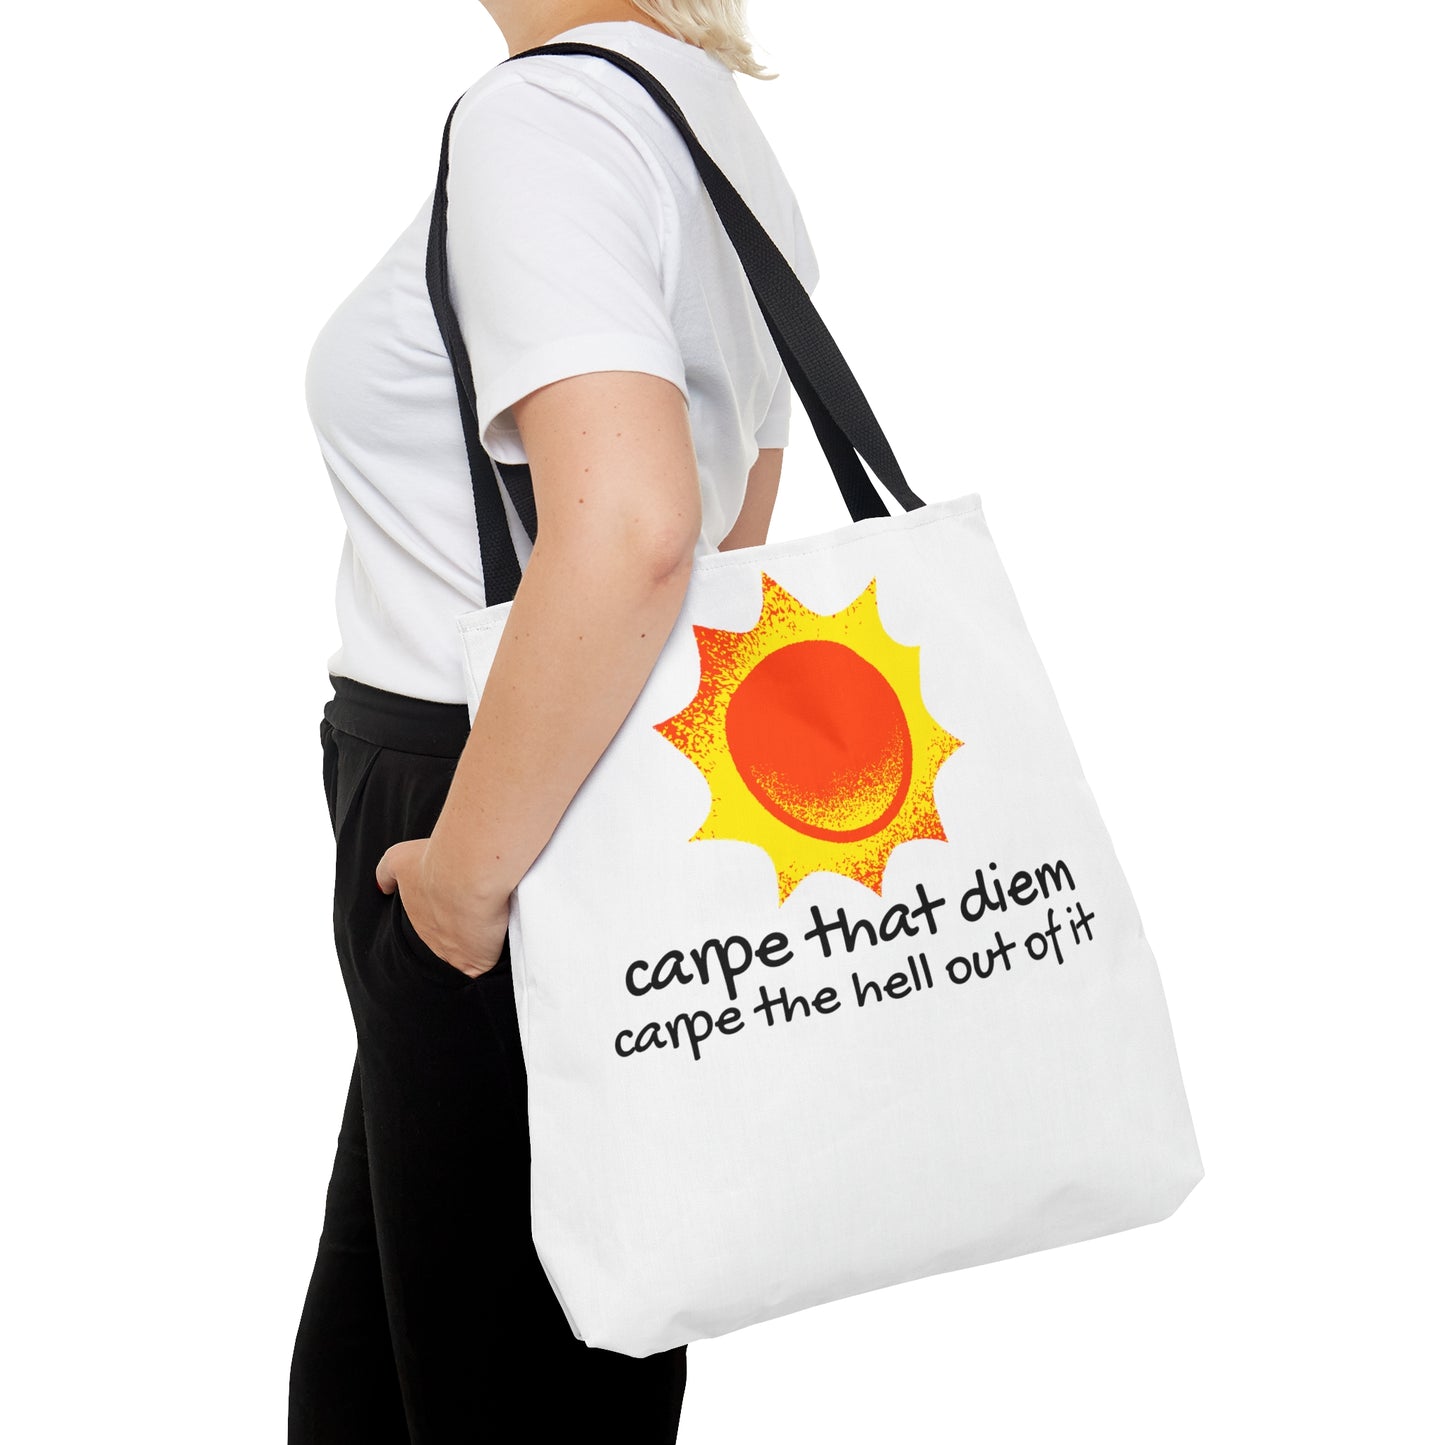 Carpe That Diem, Carpe The Hell Out Of It (Tote Bag)